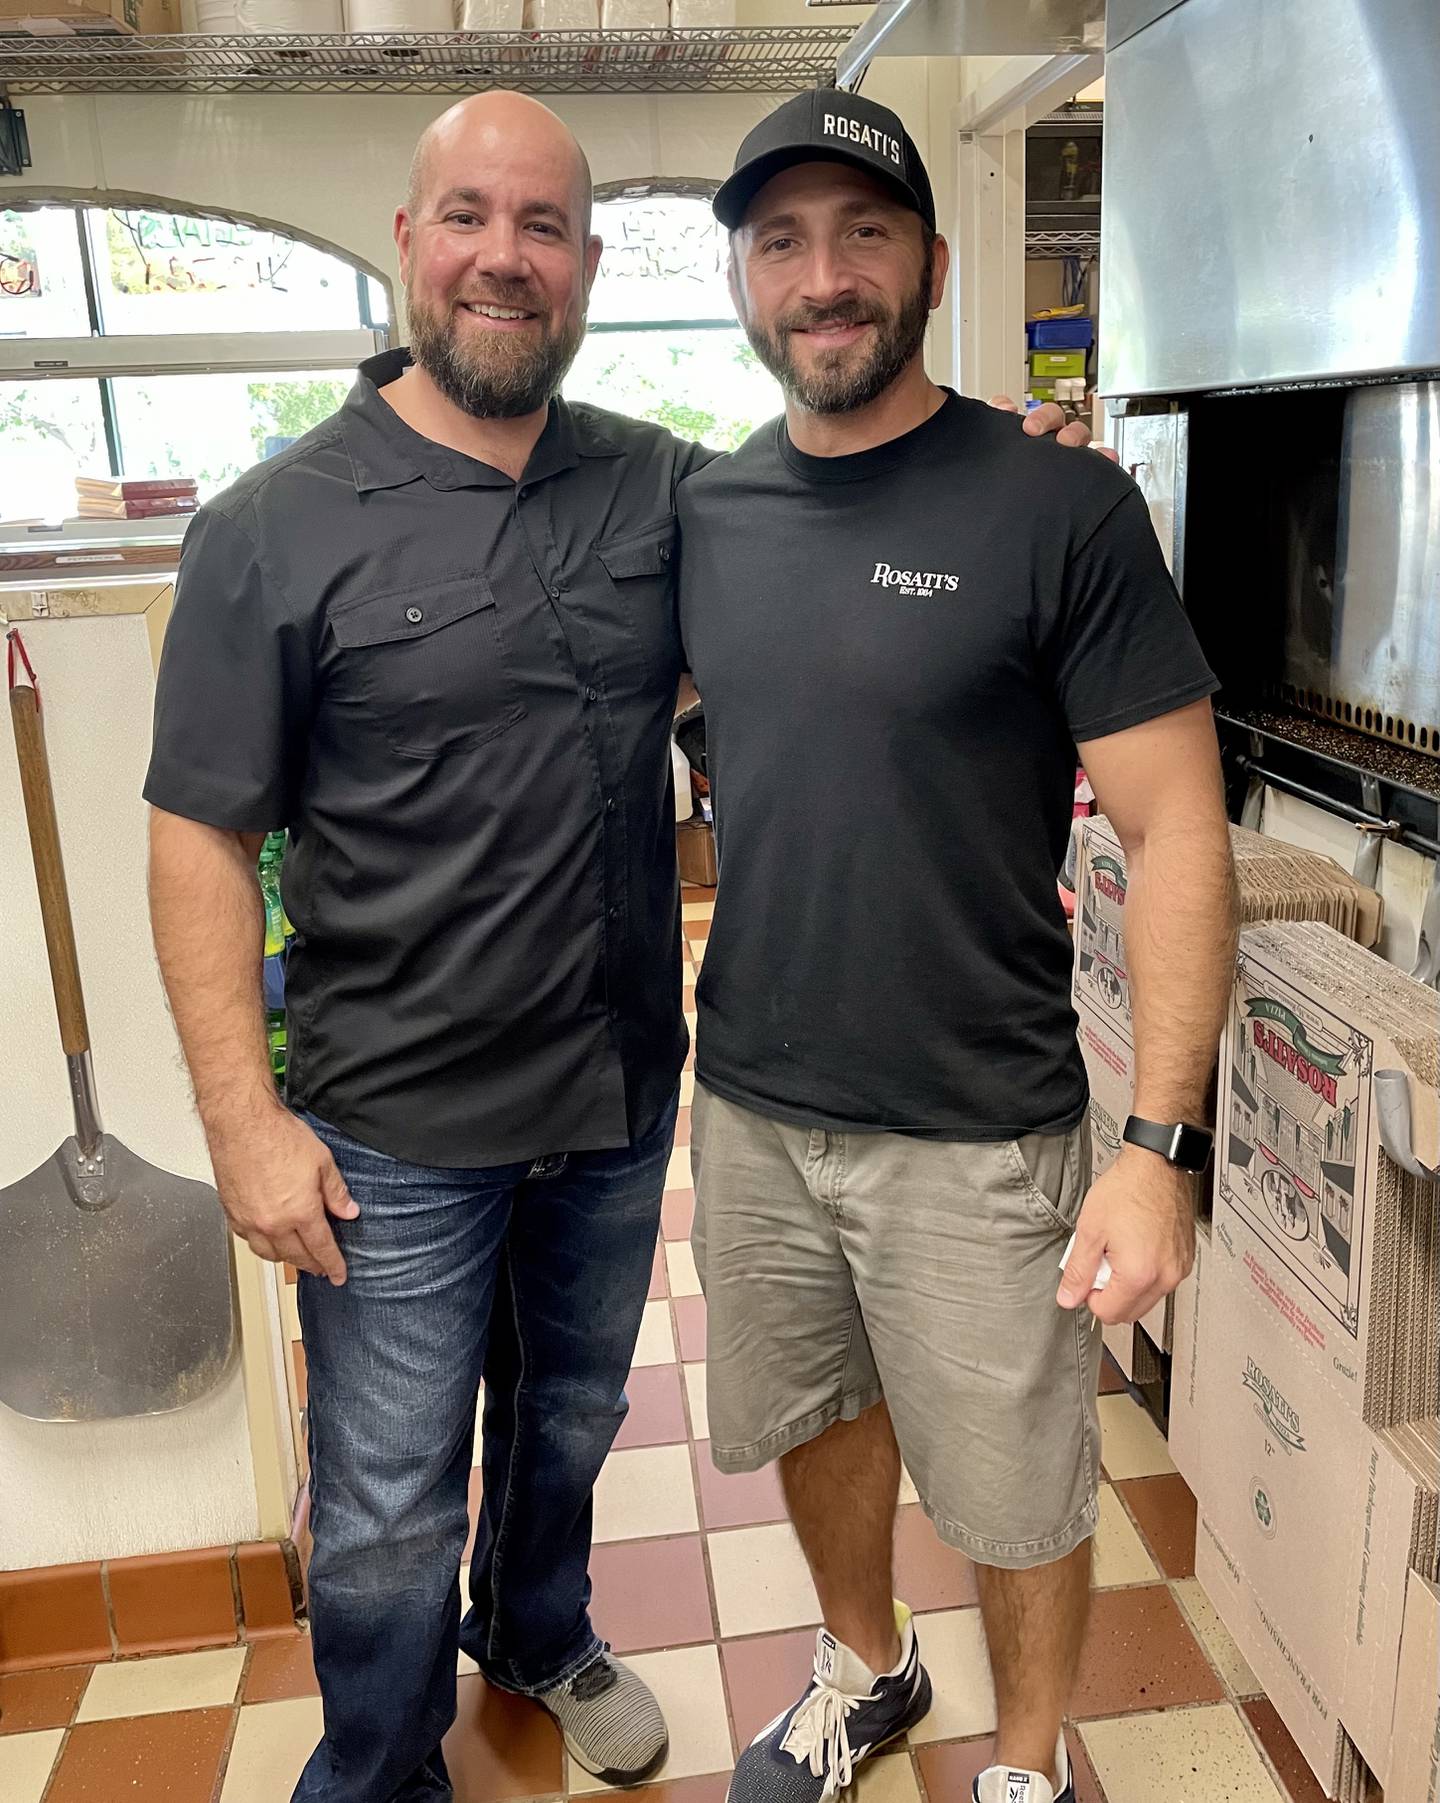 Sam Rosati (left) and Mike Rosati, are two of the four cousin owners of the Romeoville location of Rosati's Pizza. To celebrate its new ownership, Rosati’s Pizza in Romeoville will donate 25% of sales on Wednesday, September 29, 2021, to American Legion Post 52 in Romeoville.